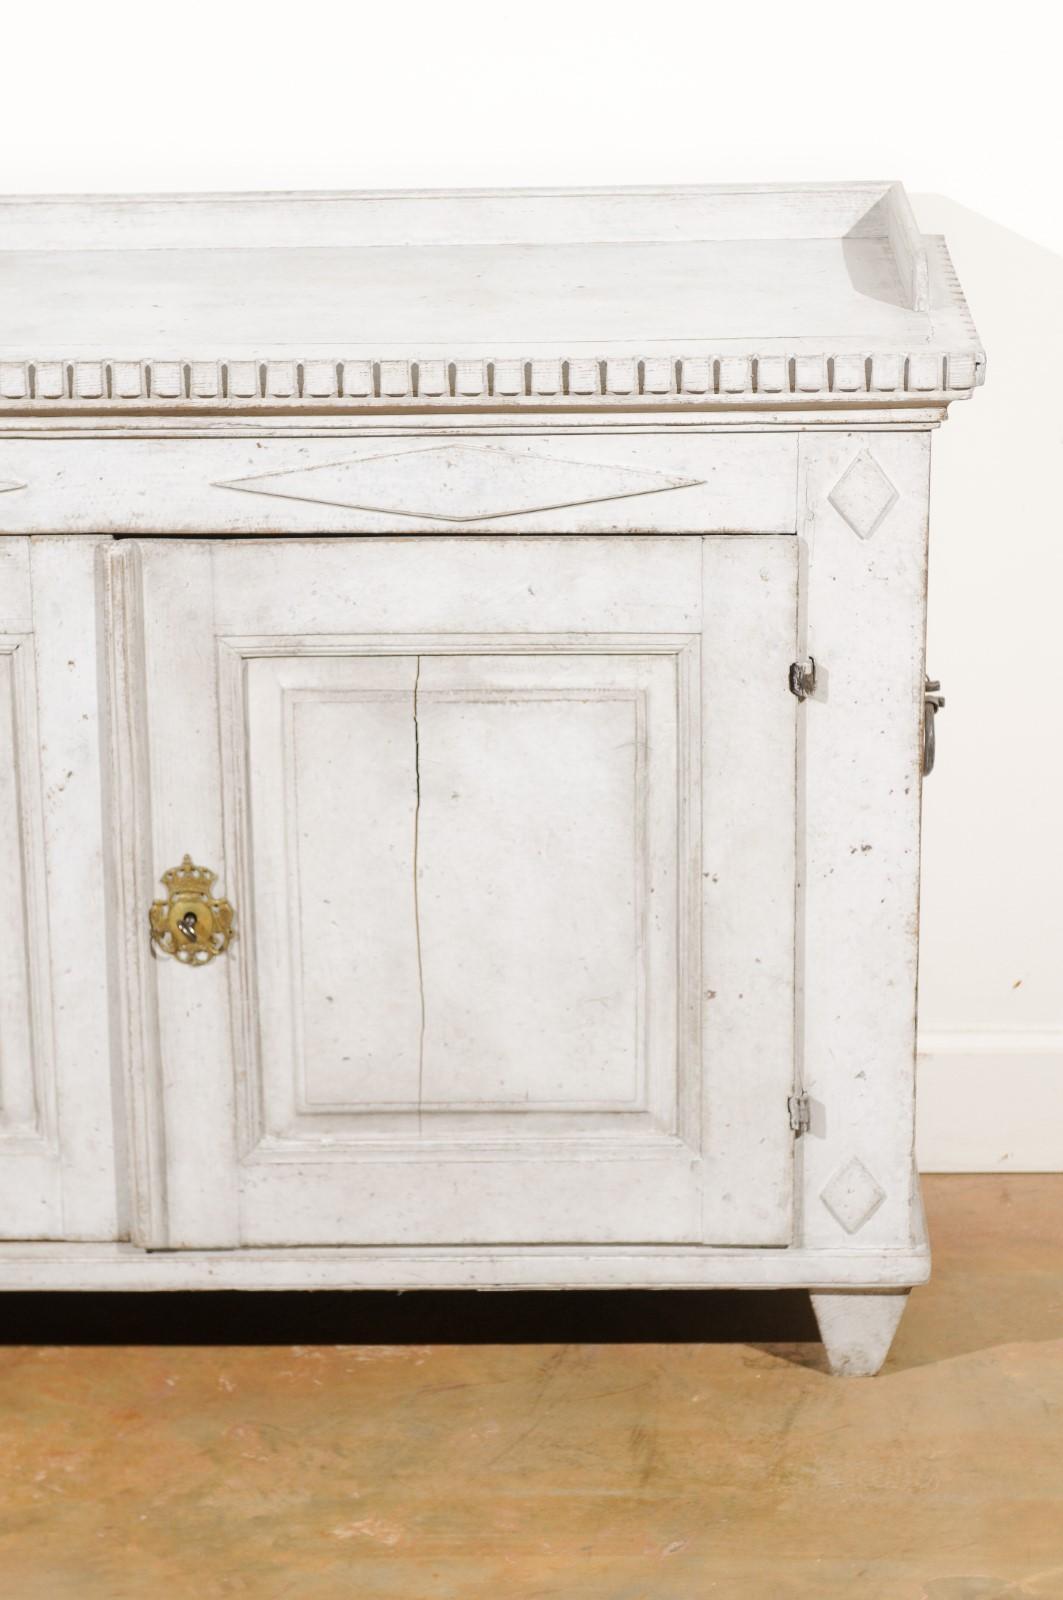 18th Century Swedish Gustavian 1790s Painted Sideboard with Dentil Molding and Diamond Motifs